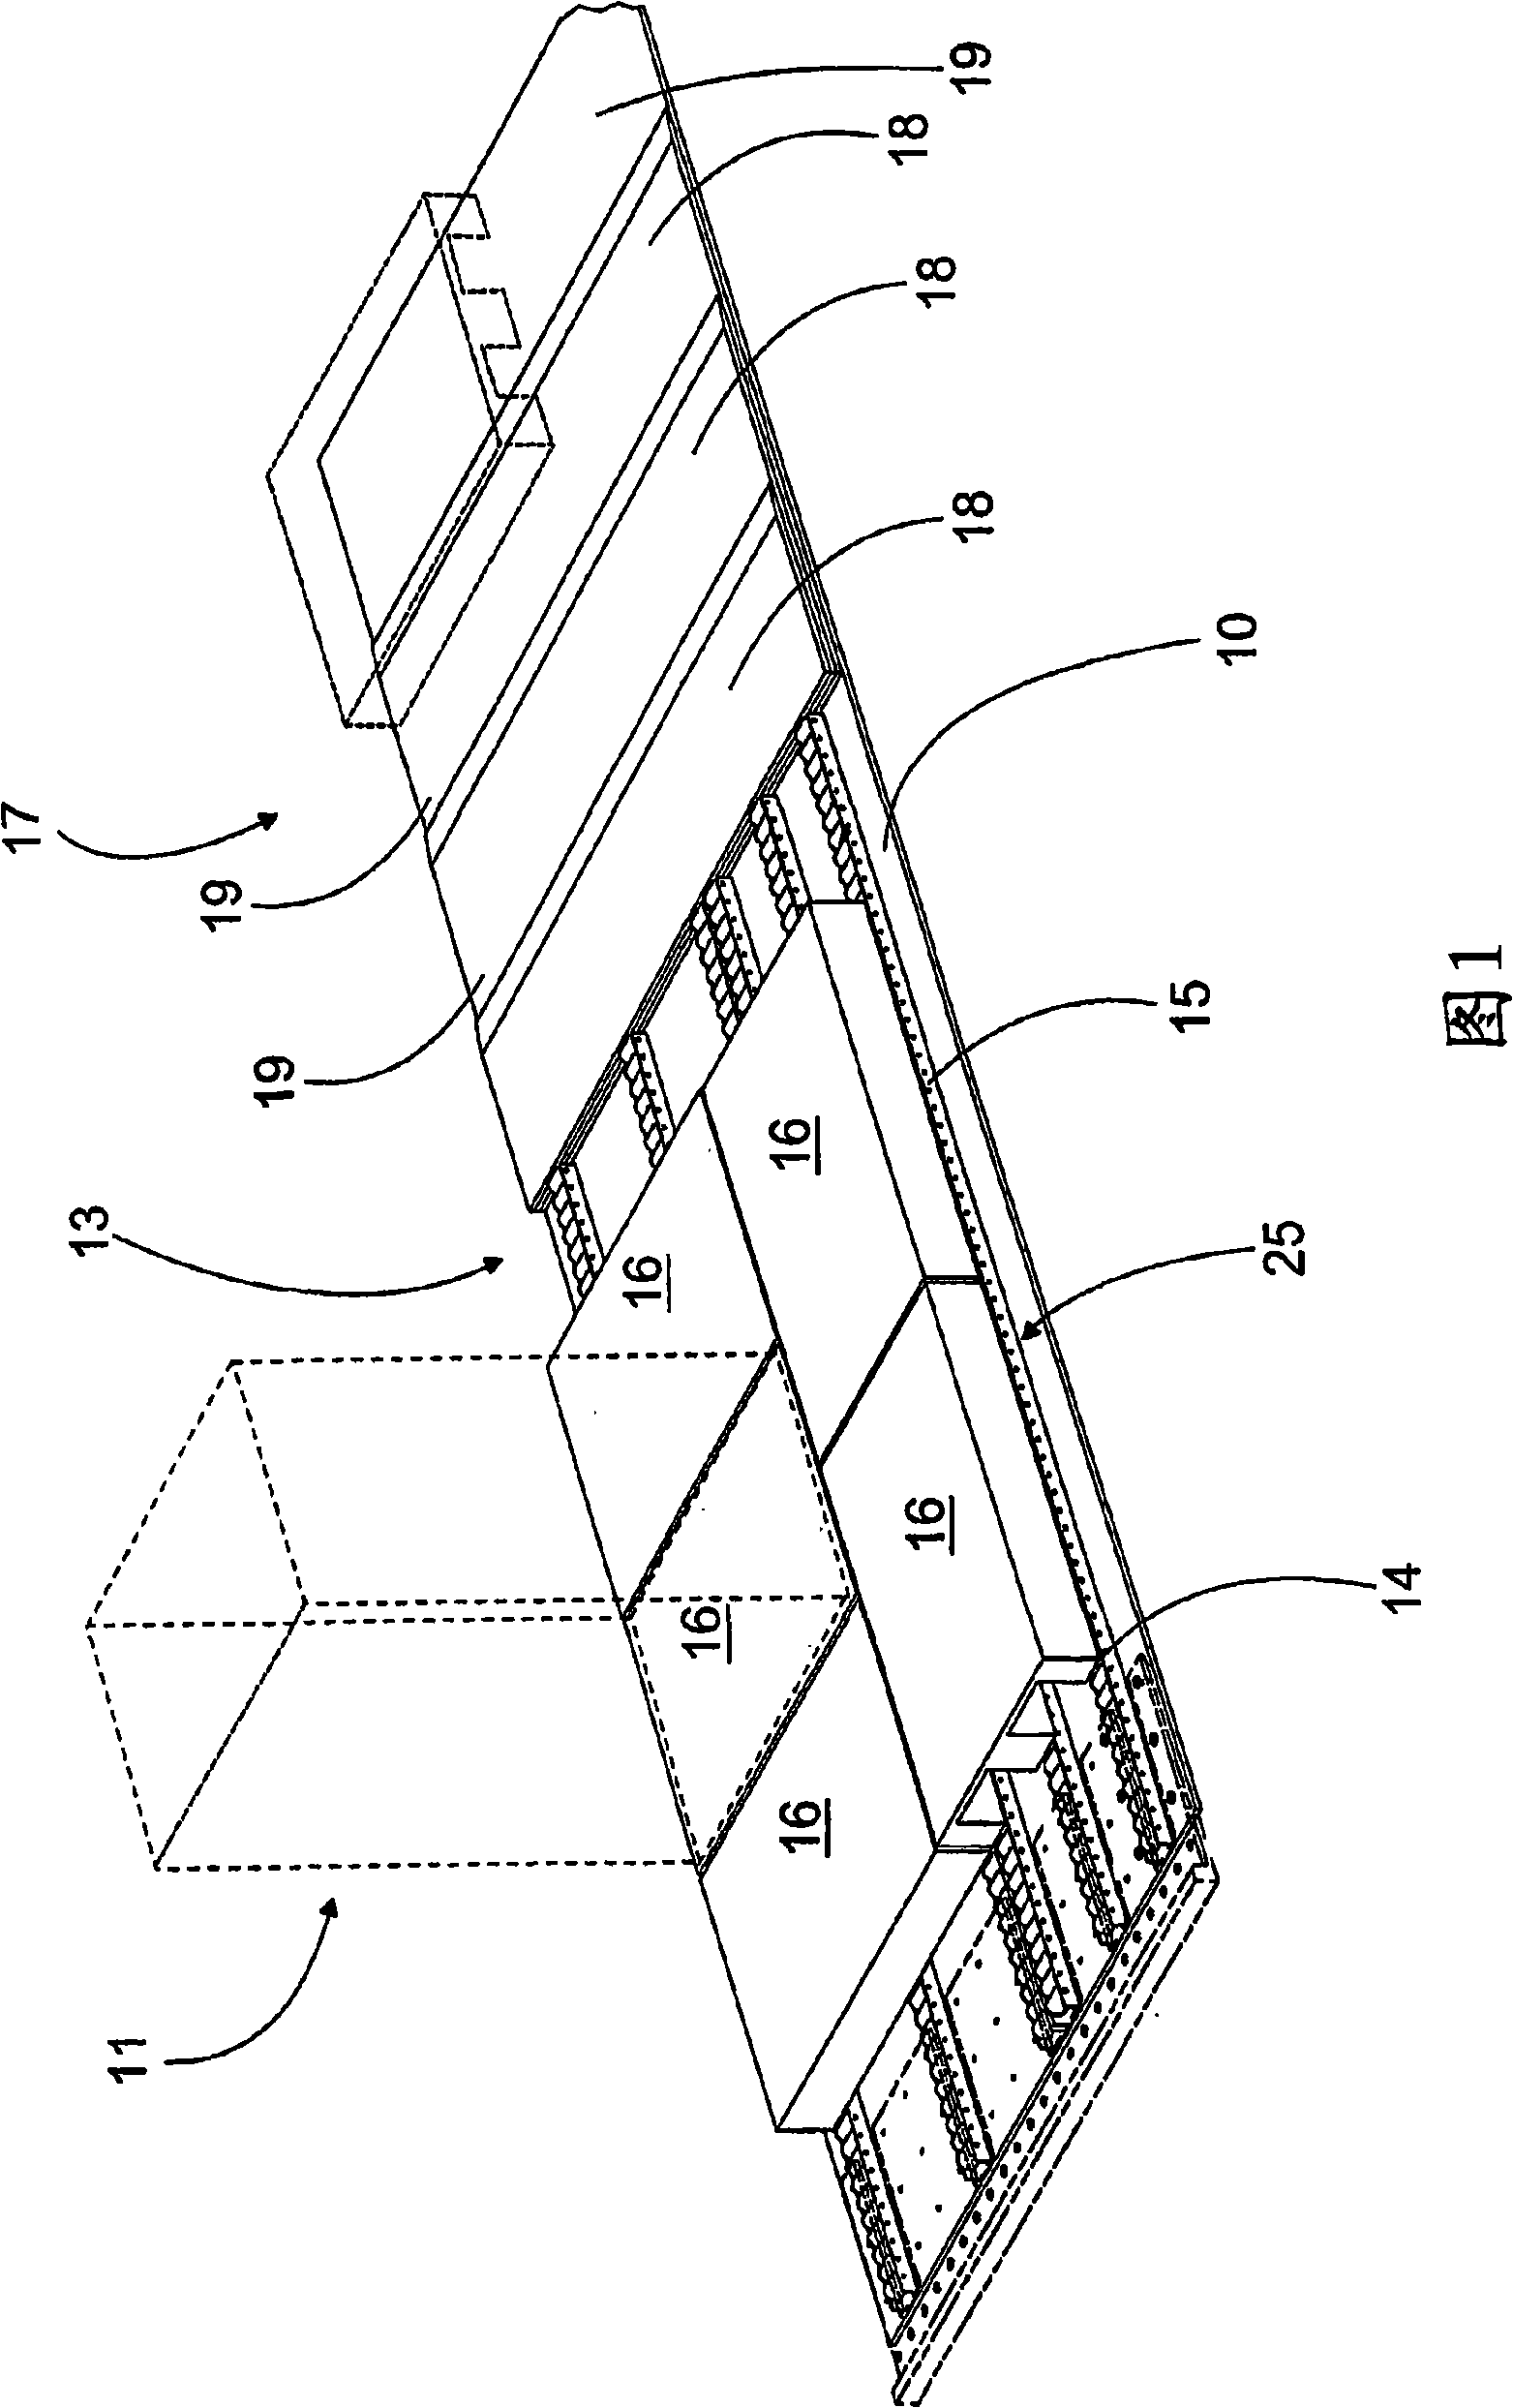 Transfer plate and method for loading a cargo space